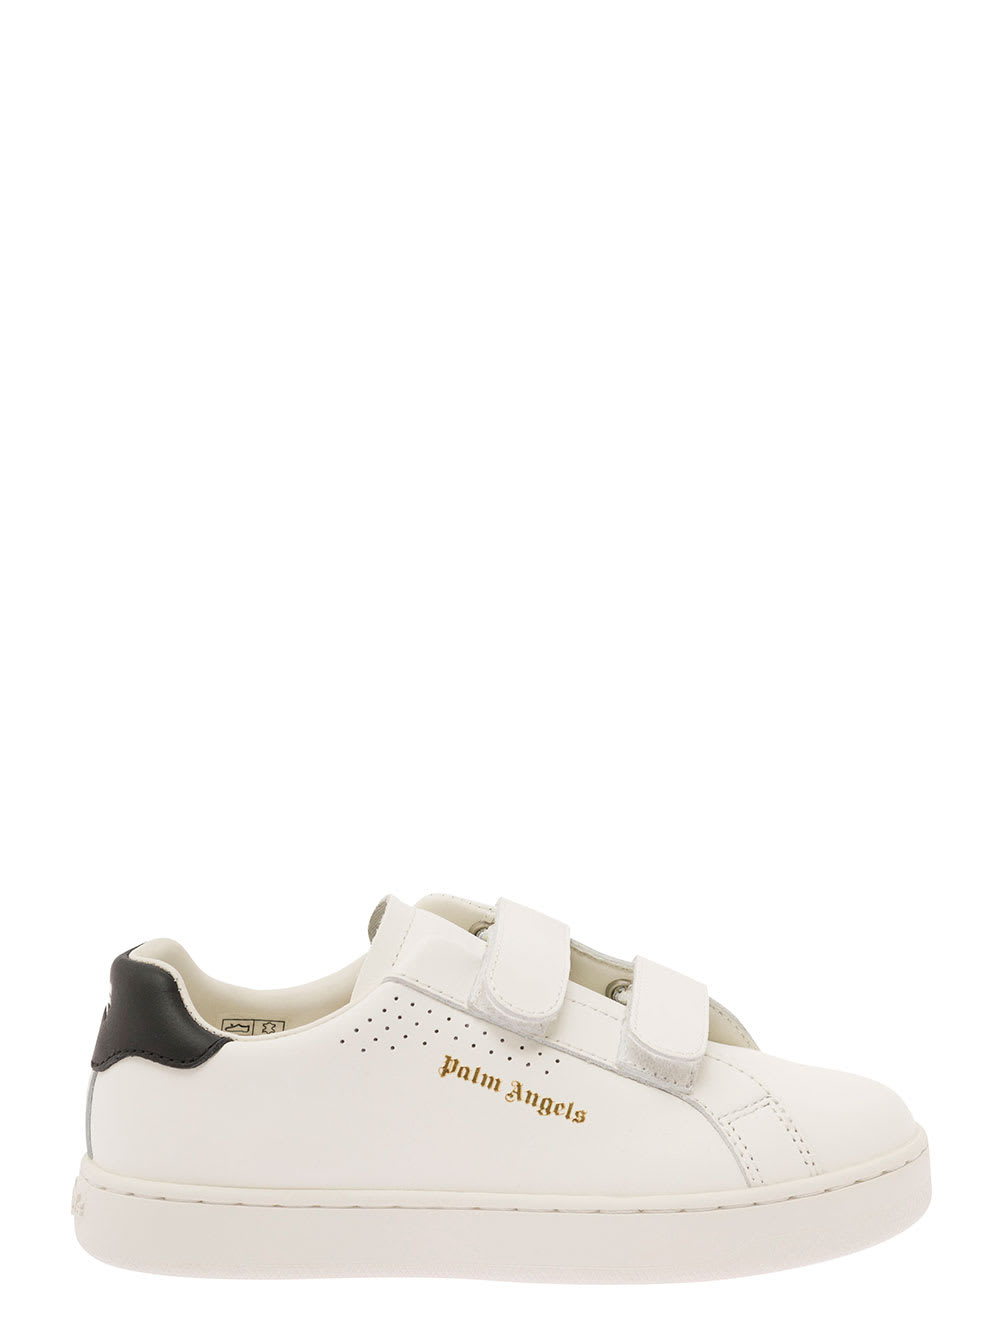 Shop Palm Angels 1 Strap In White